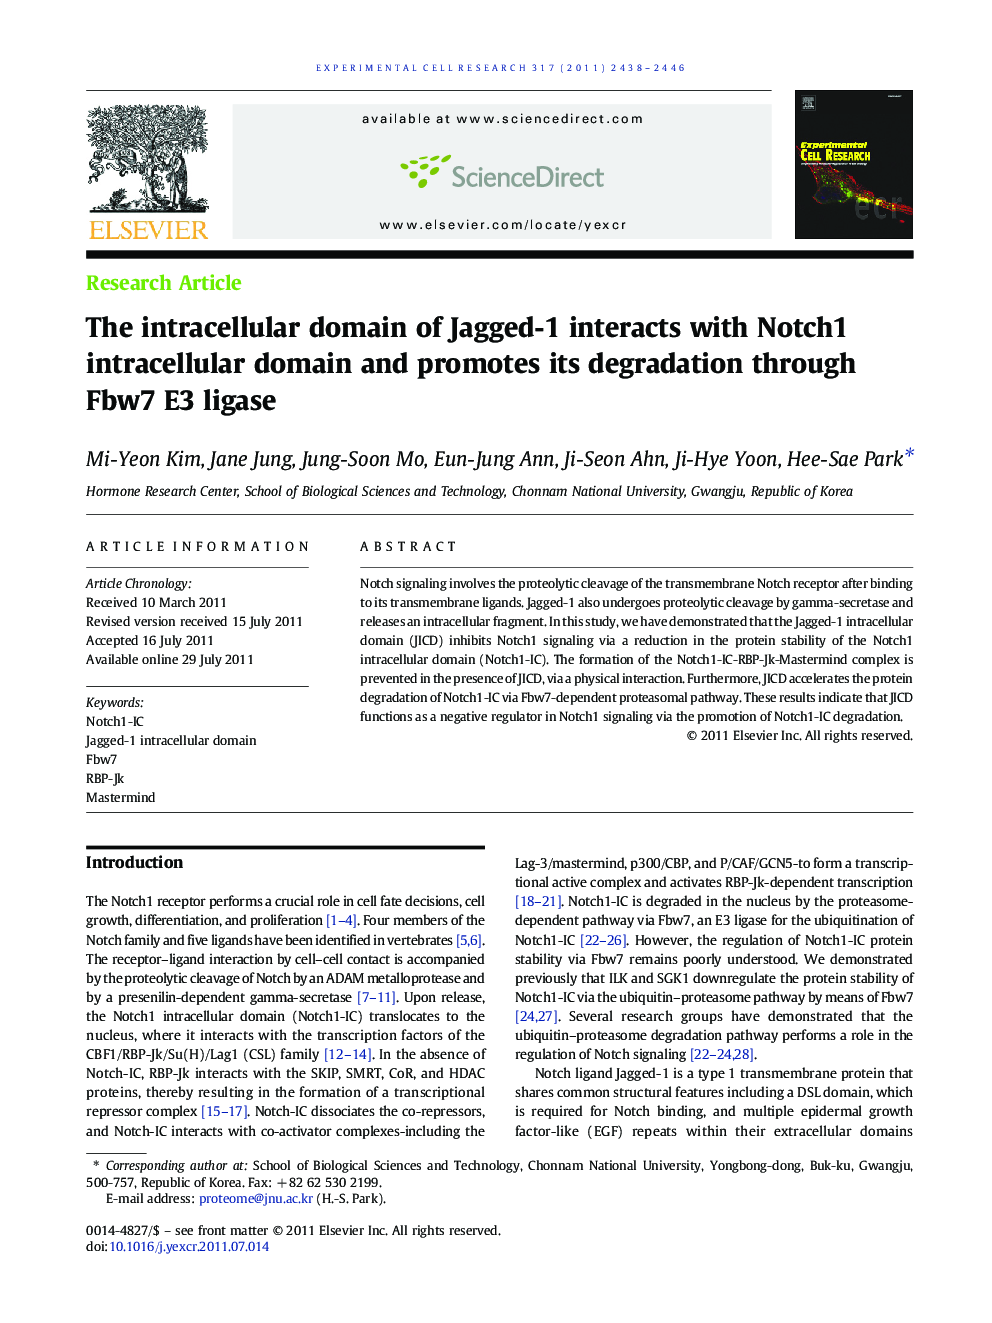 The intracellular domain of Jagged-1 interacts with Notch1 intracellular domain and promotes its degradation through Fbw7 E3 ligase